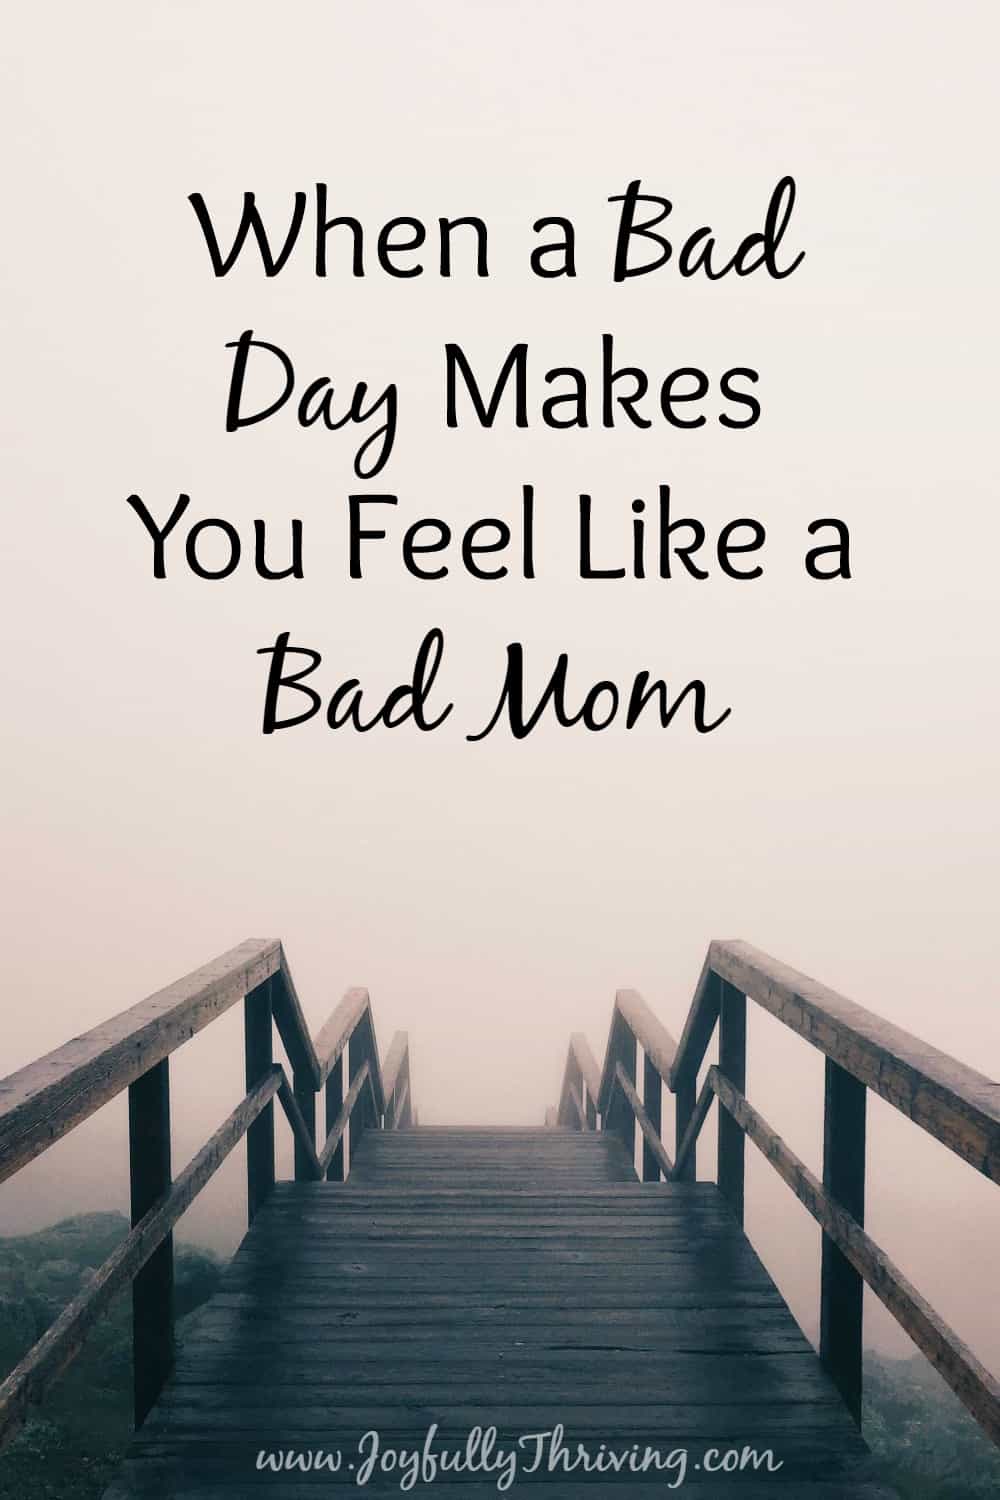 What grace-filled encouragement for those bad days when I feel like a bad mom. All Moms need to know this.